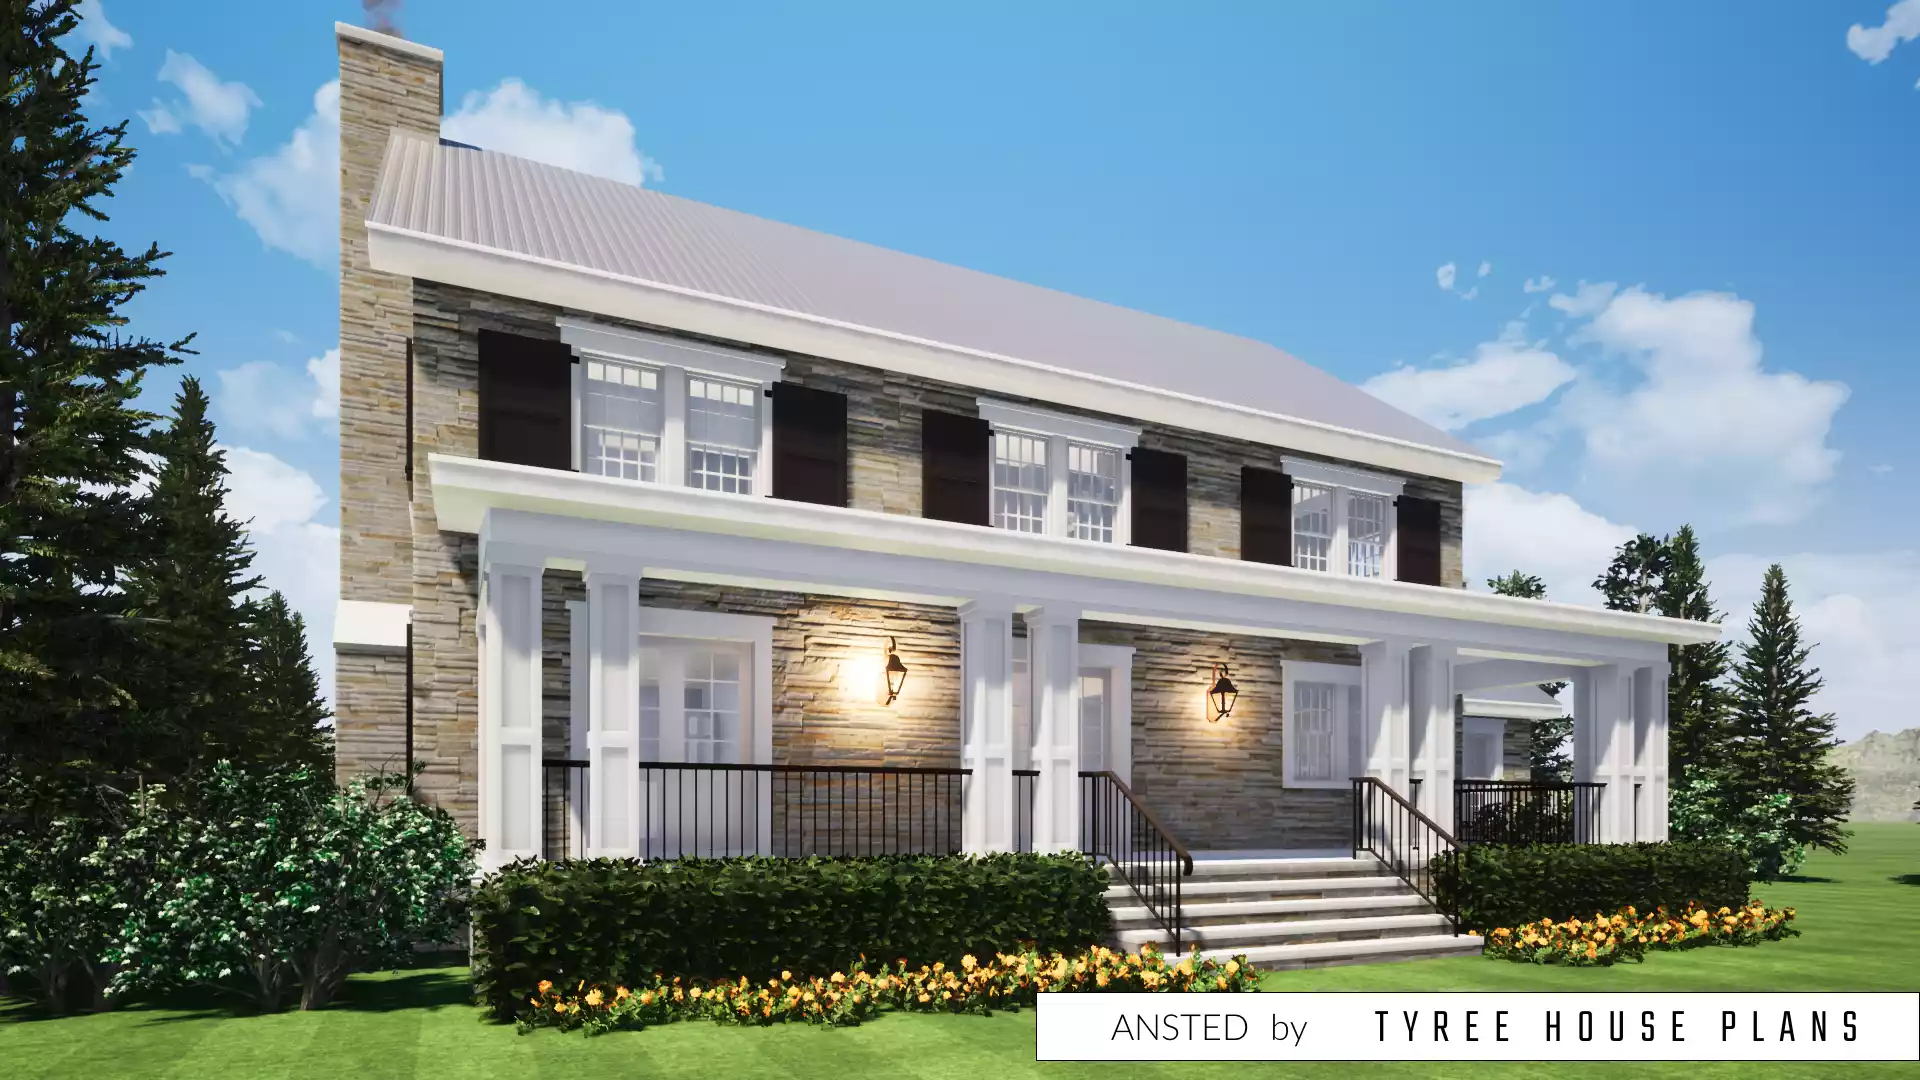 Rear view. Ansted by Tyree House Plans.